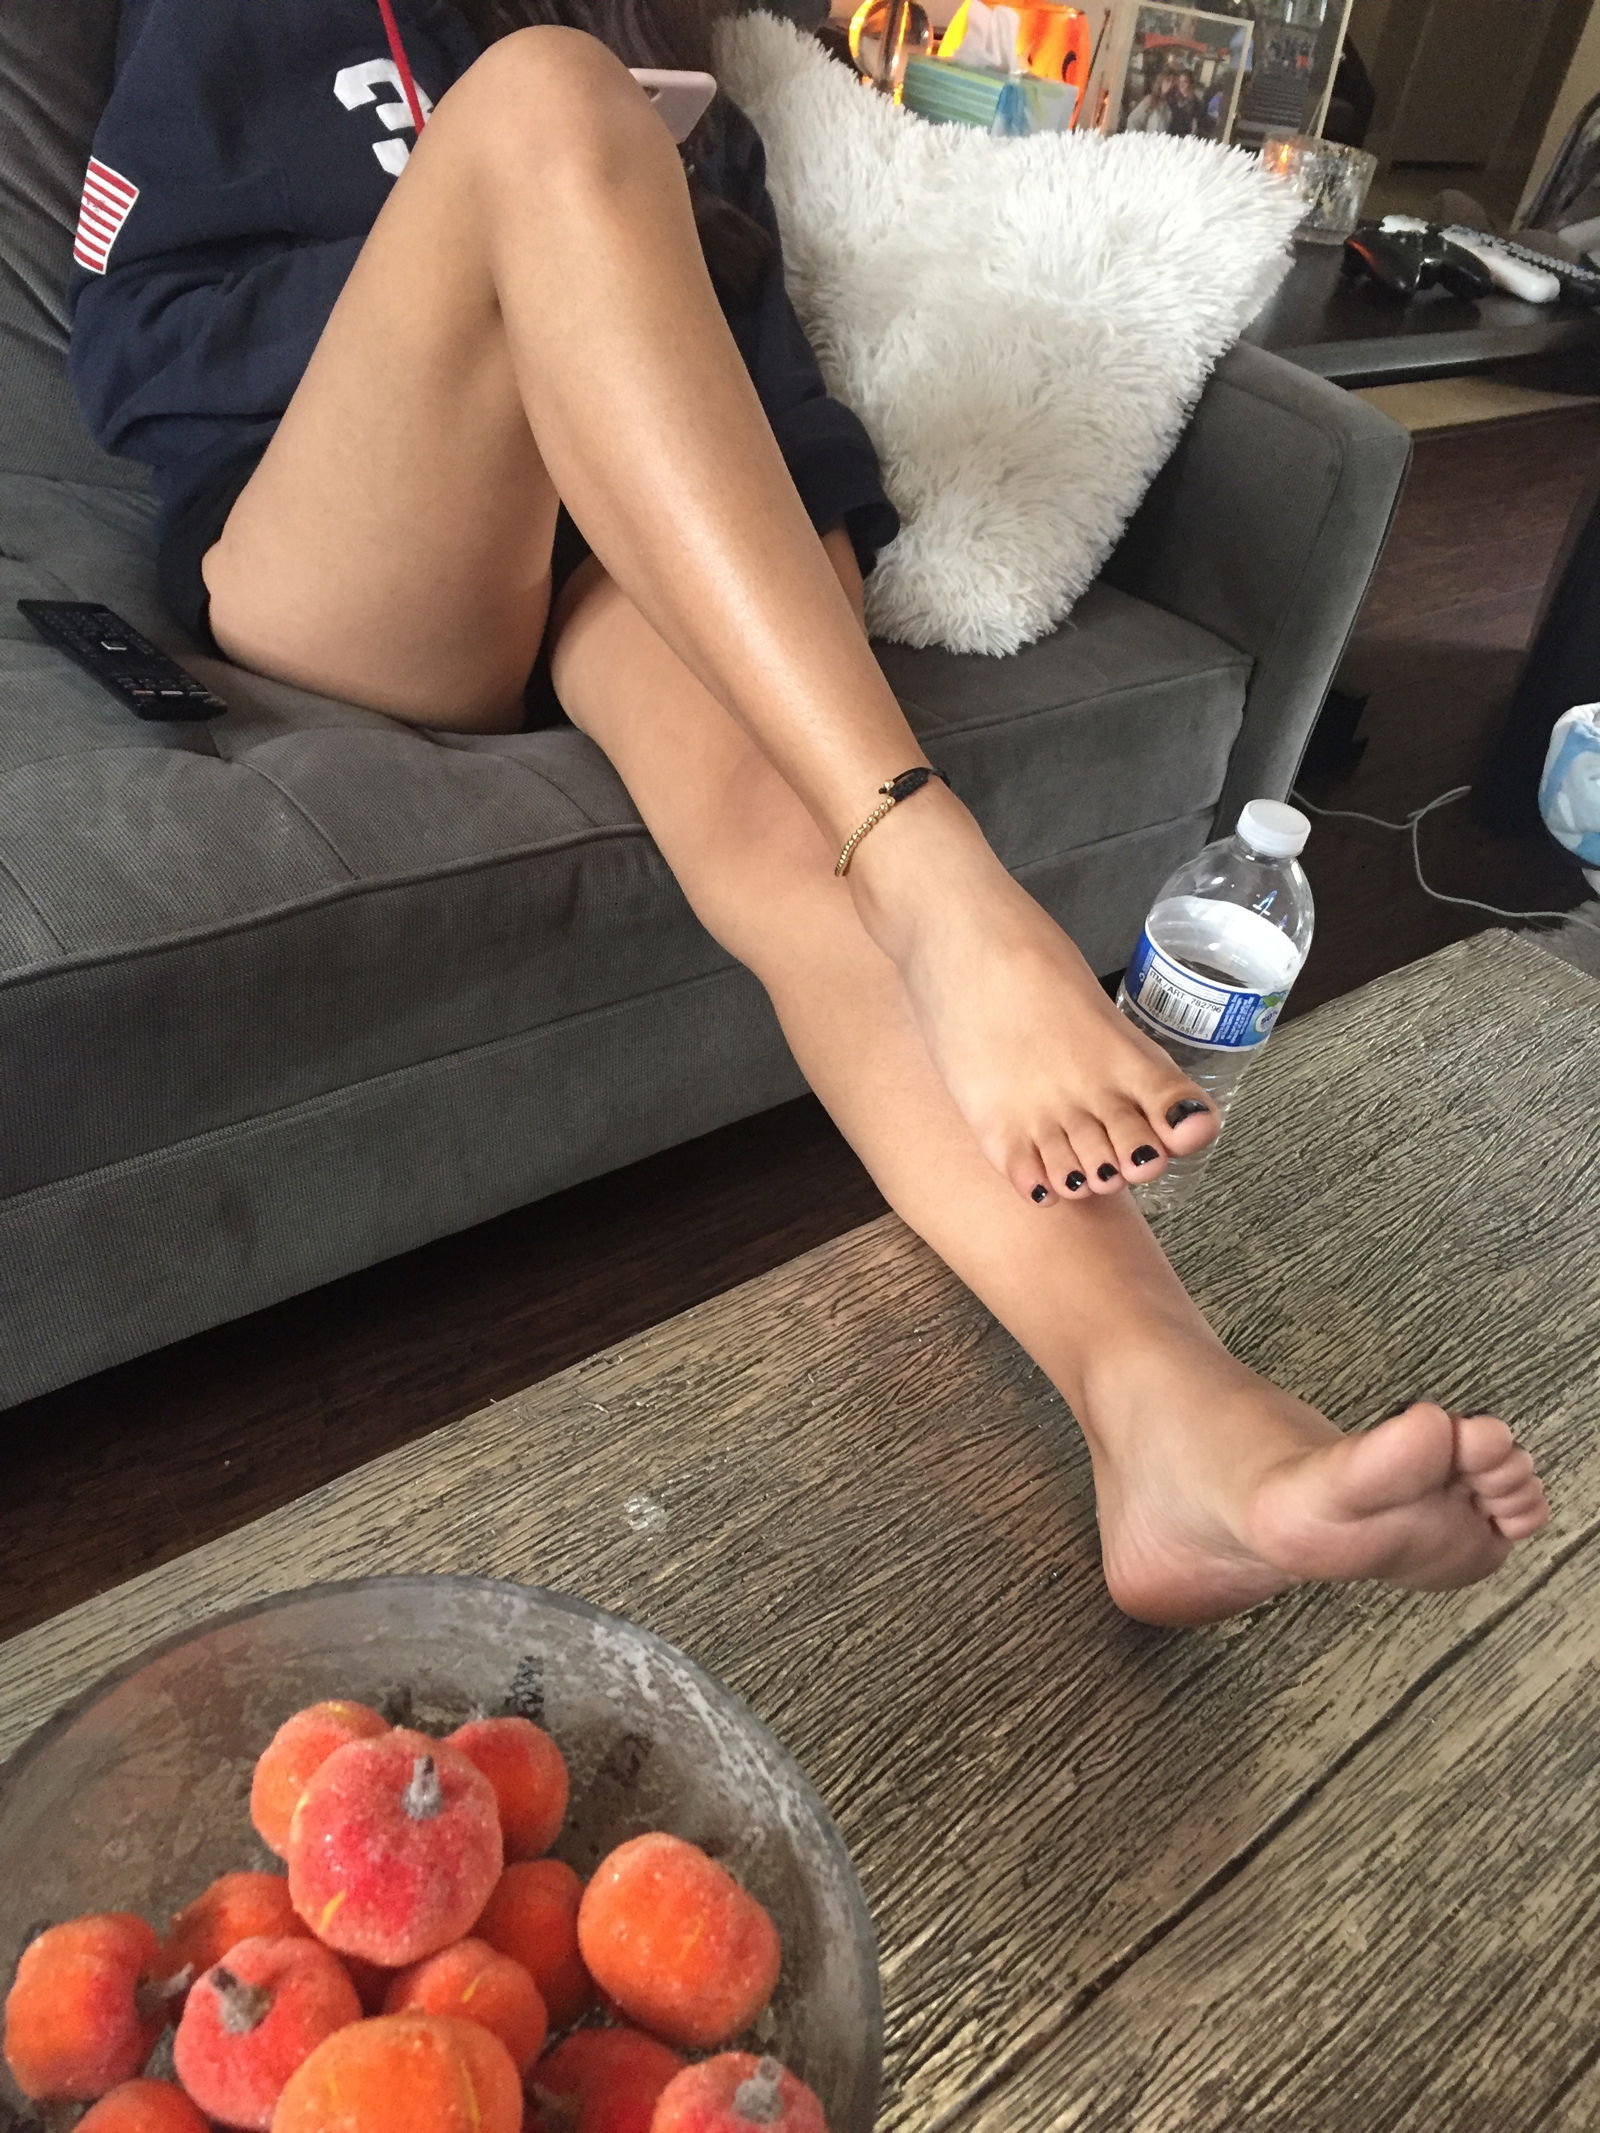 Watch the Photo by Nilegoddess with the username @Nilegoddess, who is a star user, posted on October 24, 2017 and the text says 'Ready for Halloween :) #halloween  #feet  #pumpkin  #toes  #teen  #sexy  #ass  #legs  #young  #nail  #polish'